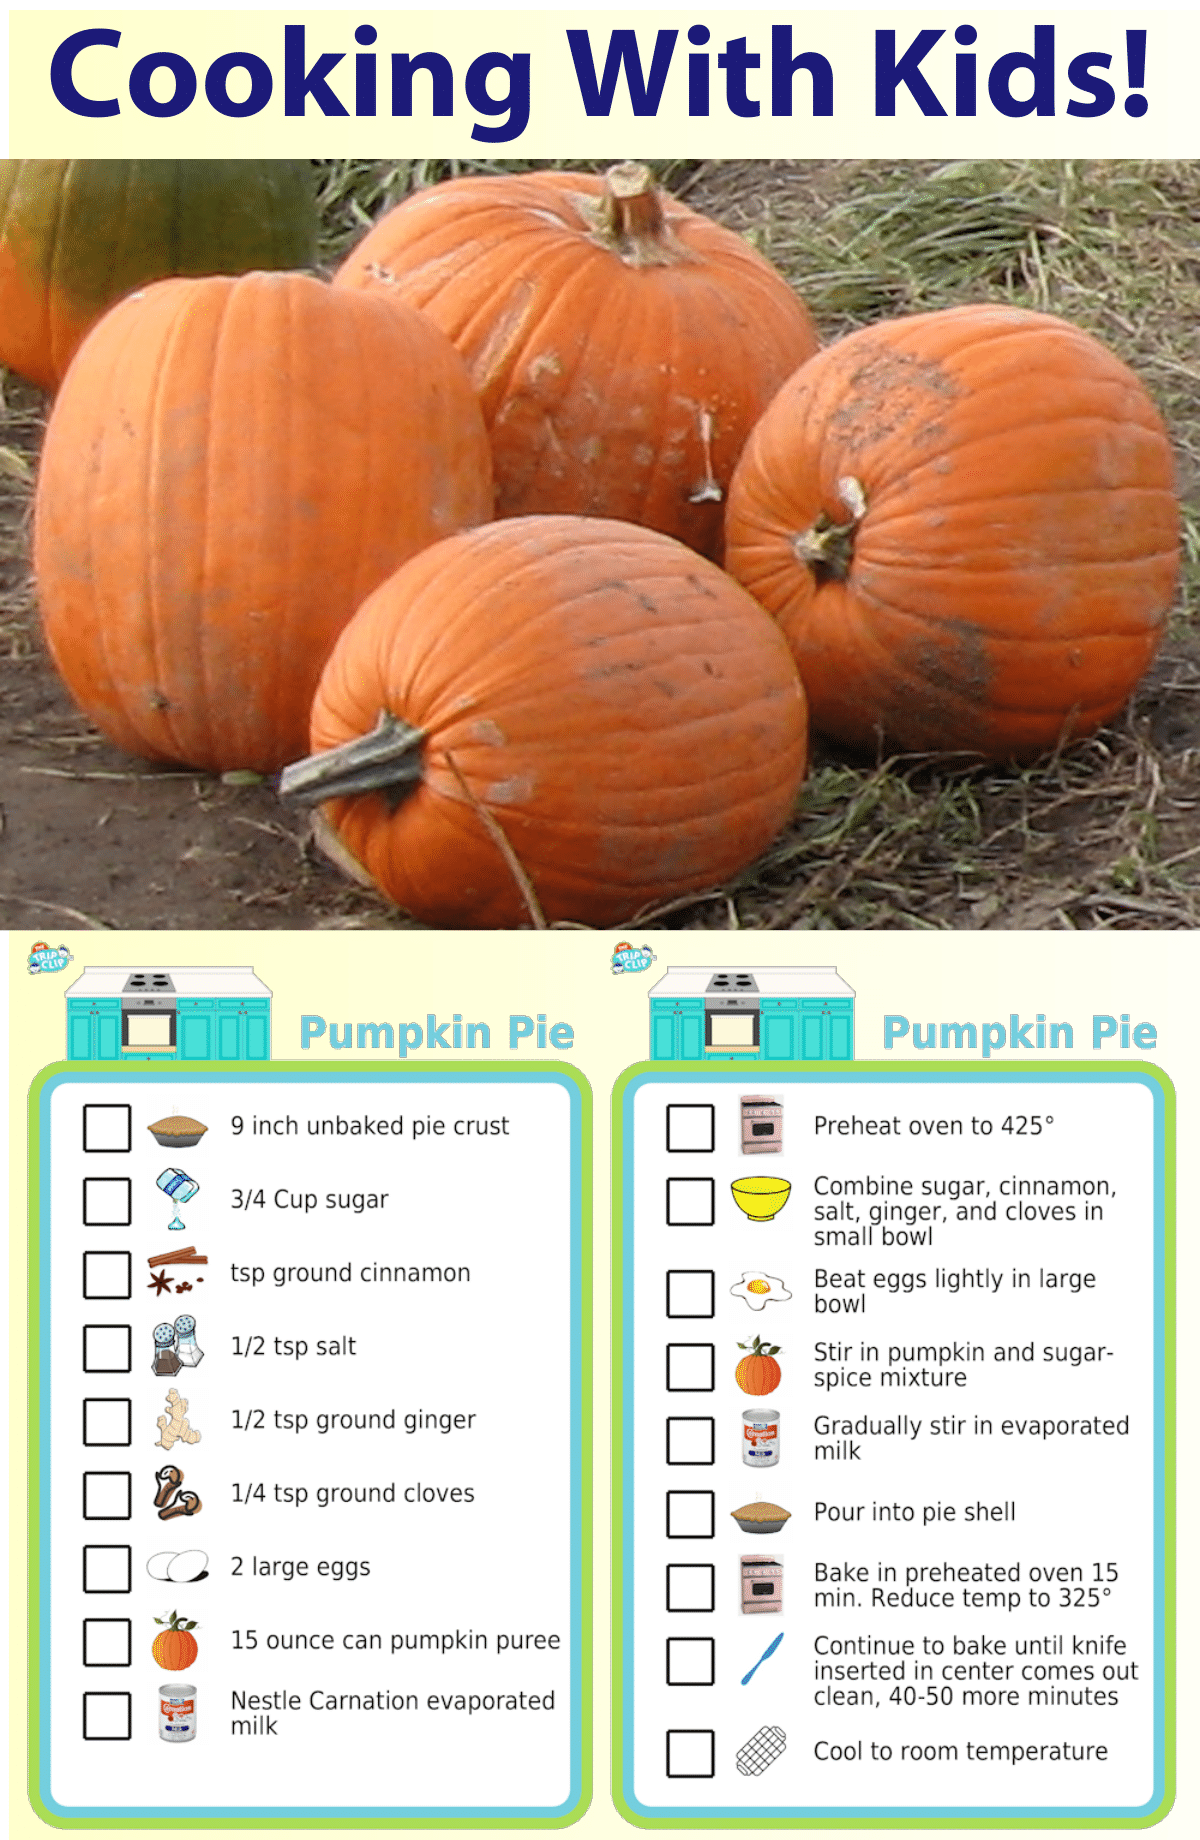 Picture checklist showing recipe for making a pumpkin pie